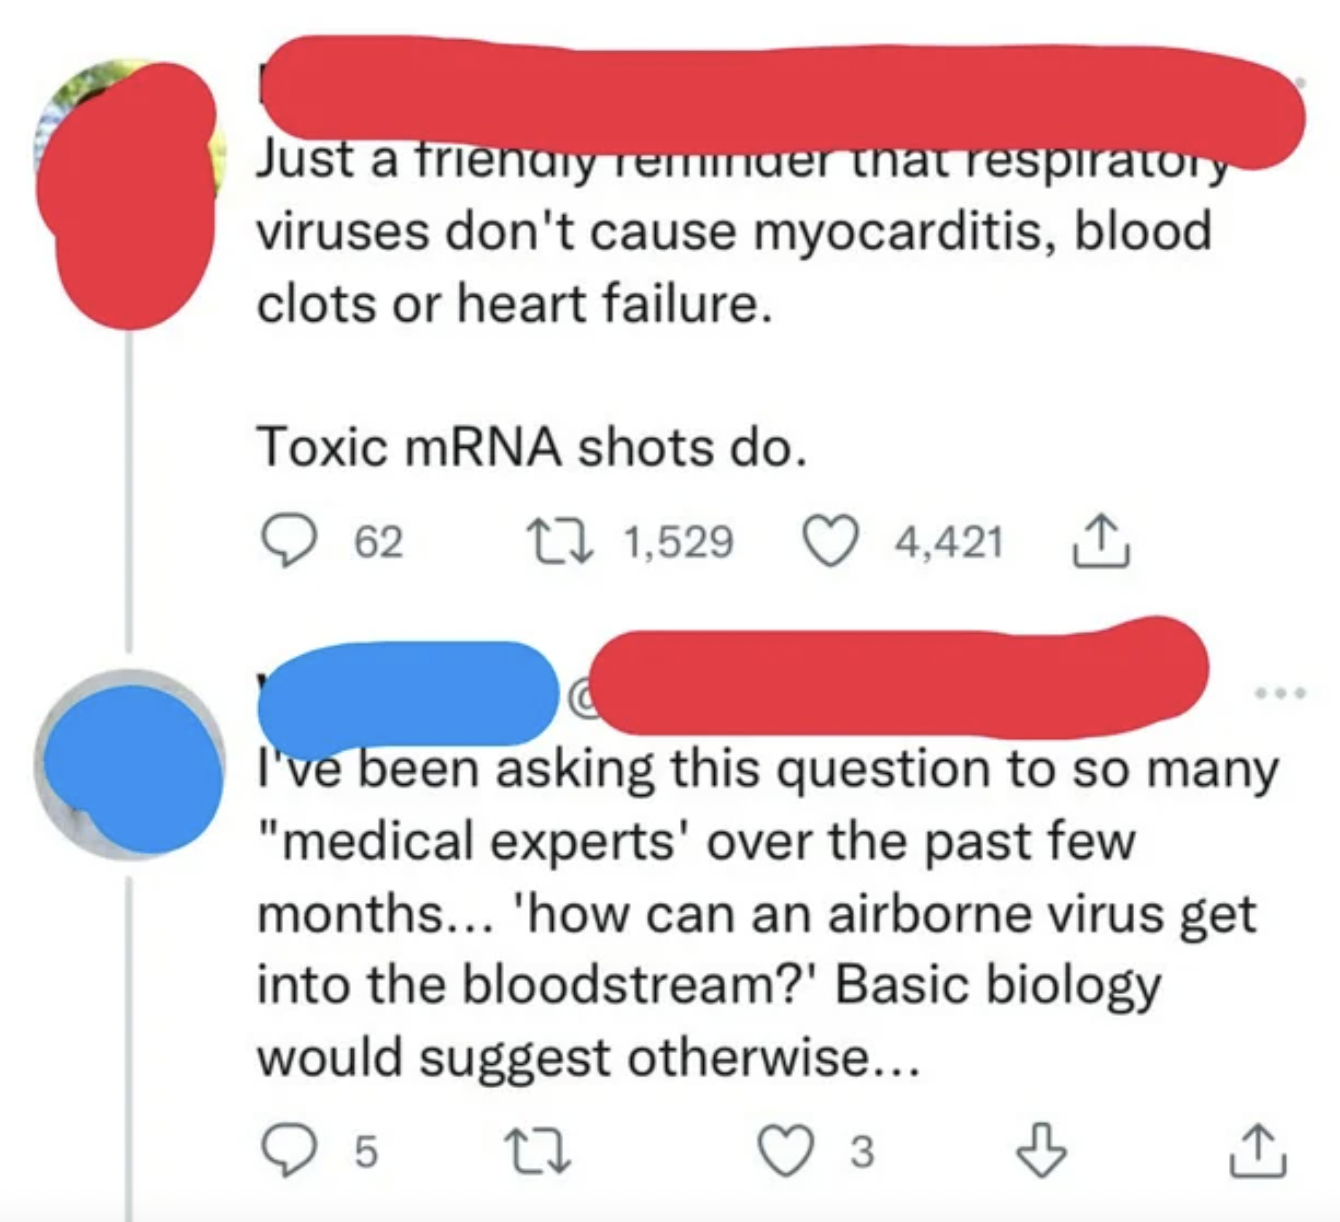 Confidently incorrect people - Just a friendly reminder that respiratory viruses don't cause myocarditis, blood clots or heart failure. Toxic mRNA shots do.